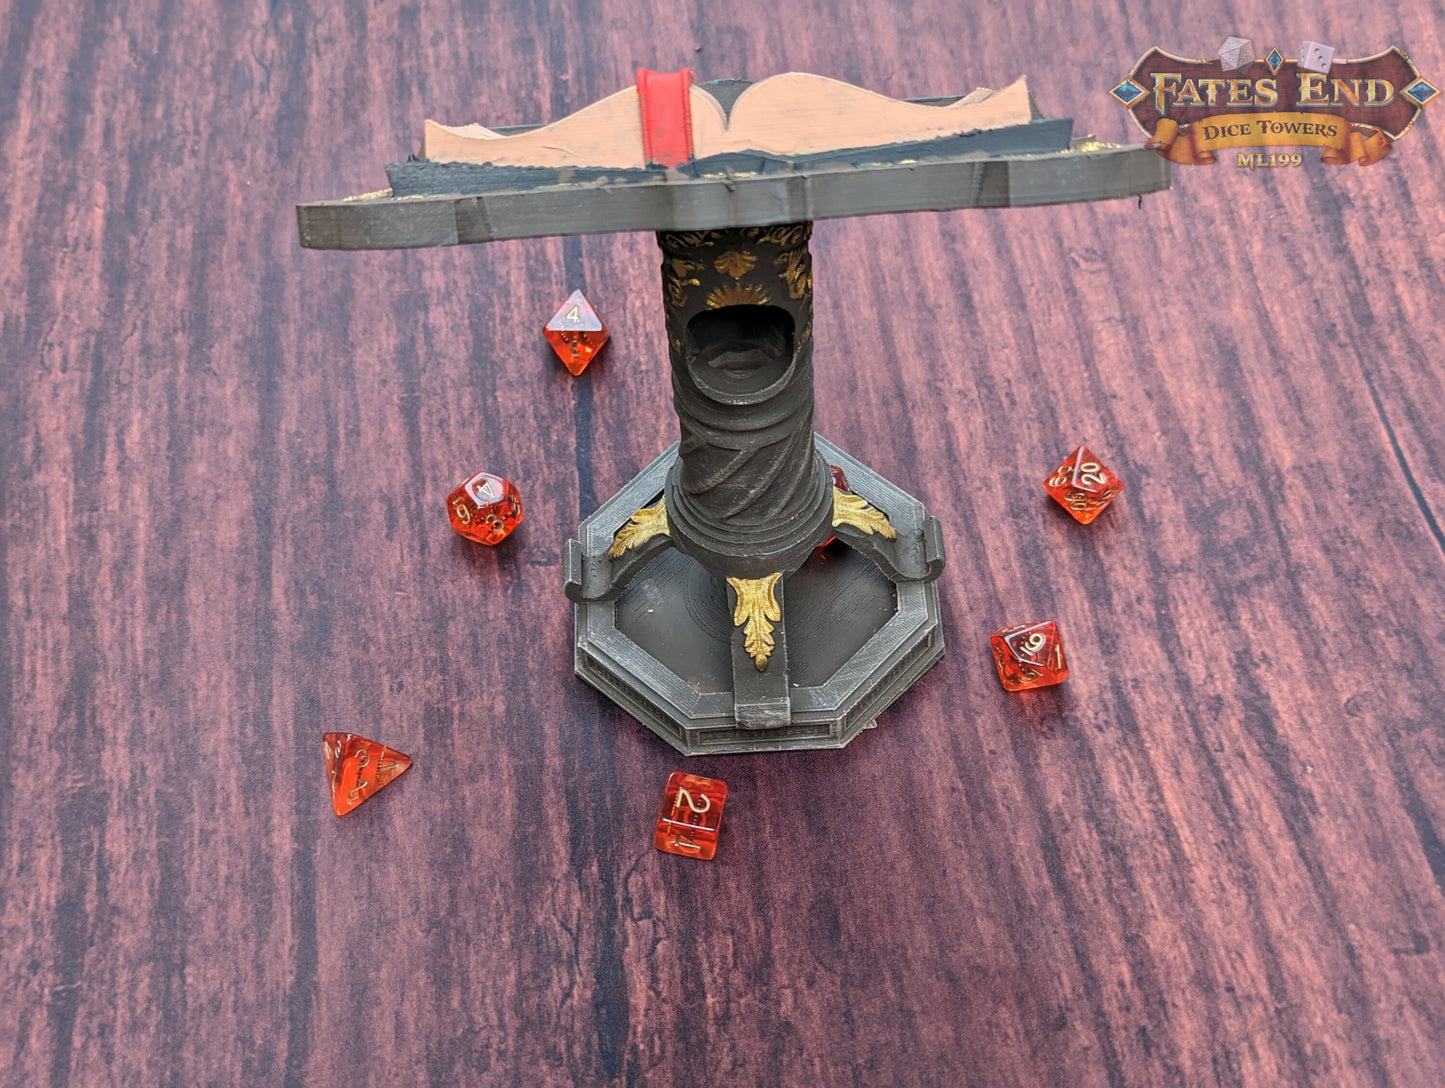 Magic Book Tome Dice Tower-Fate's End-Furhaven